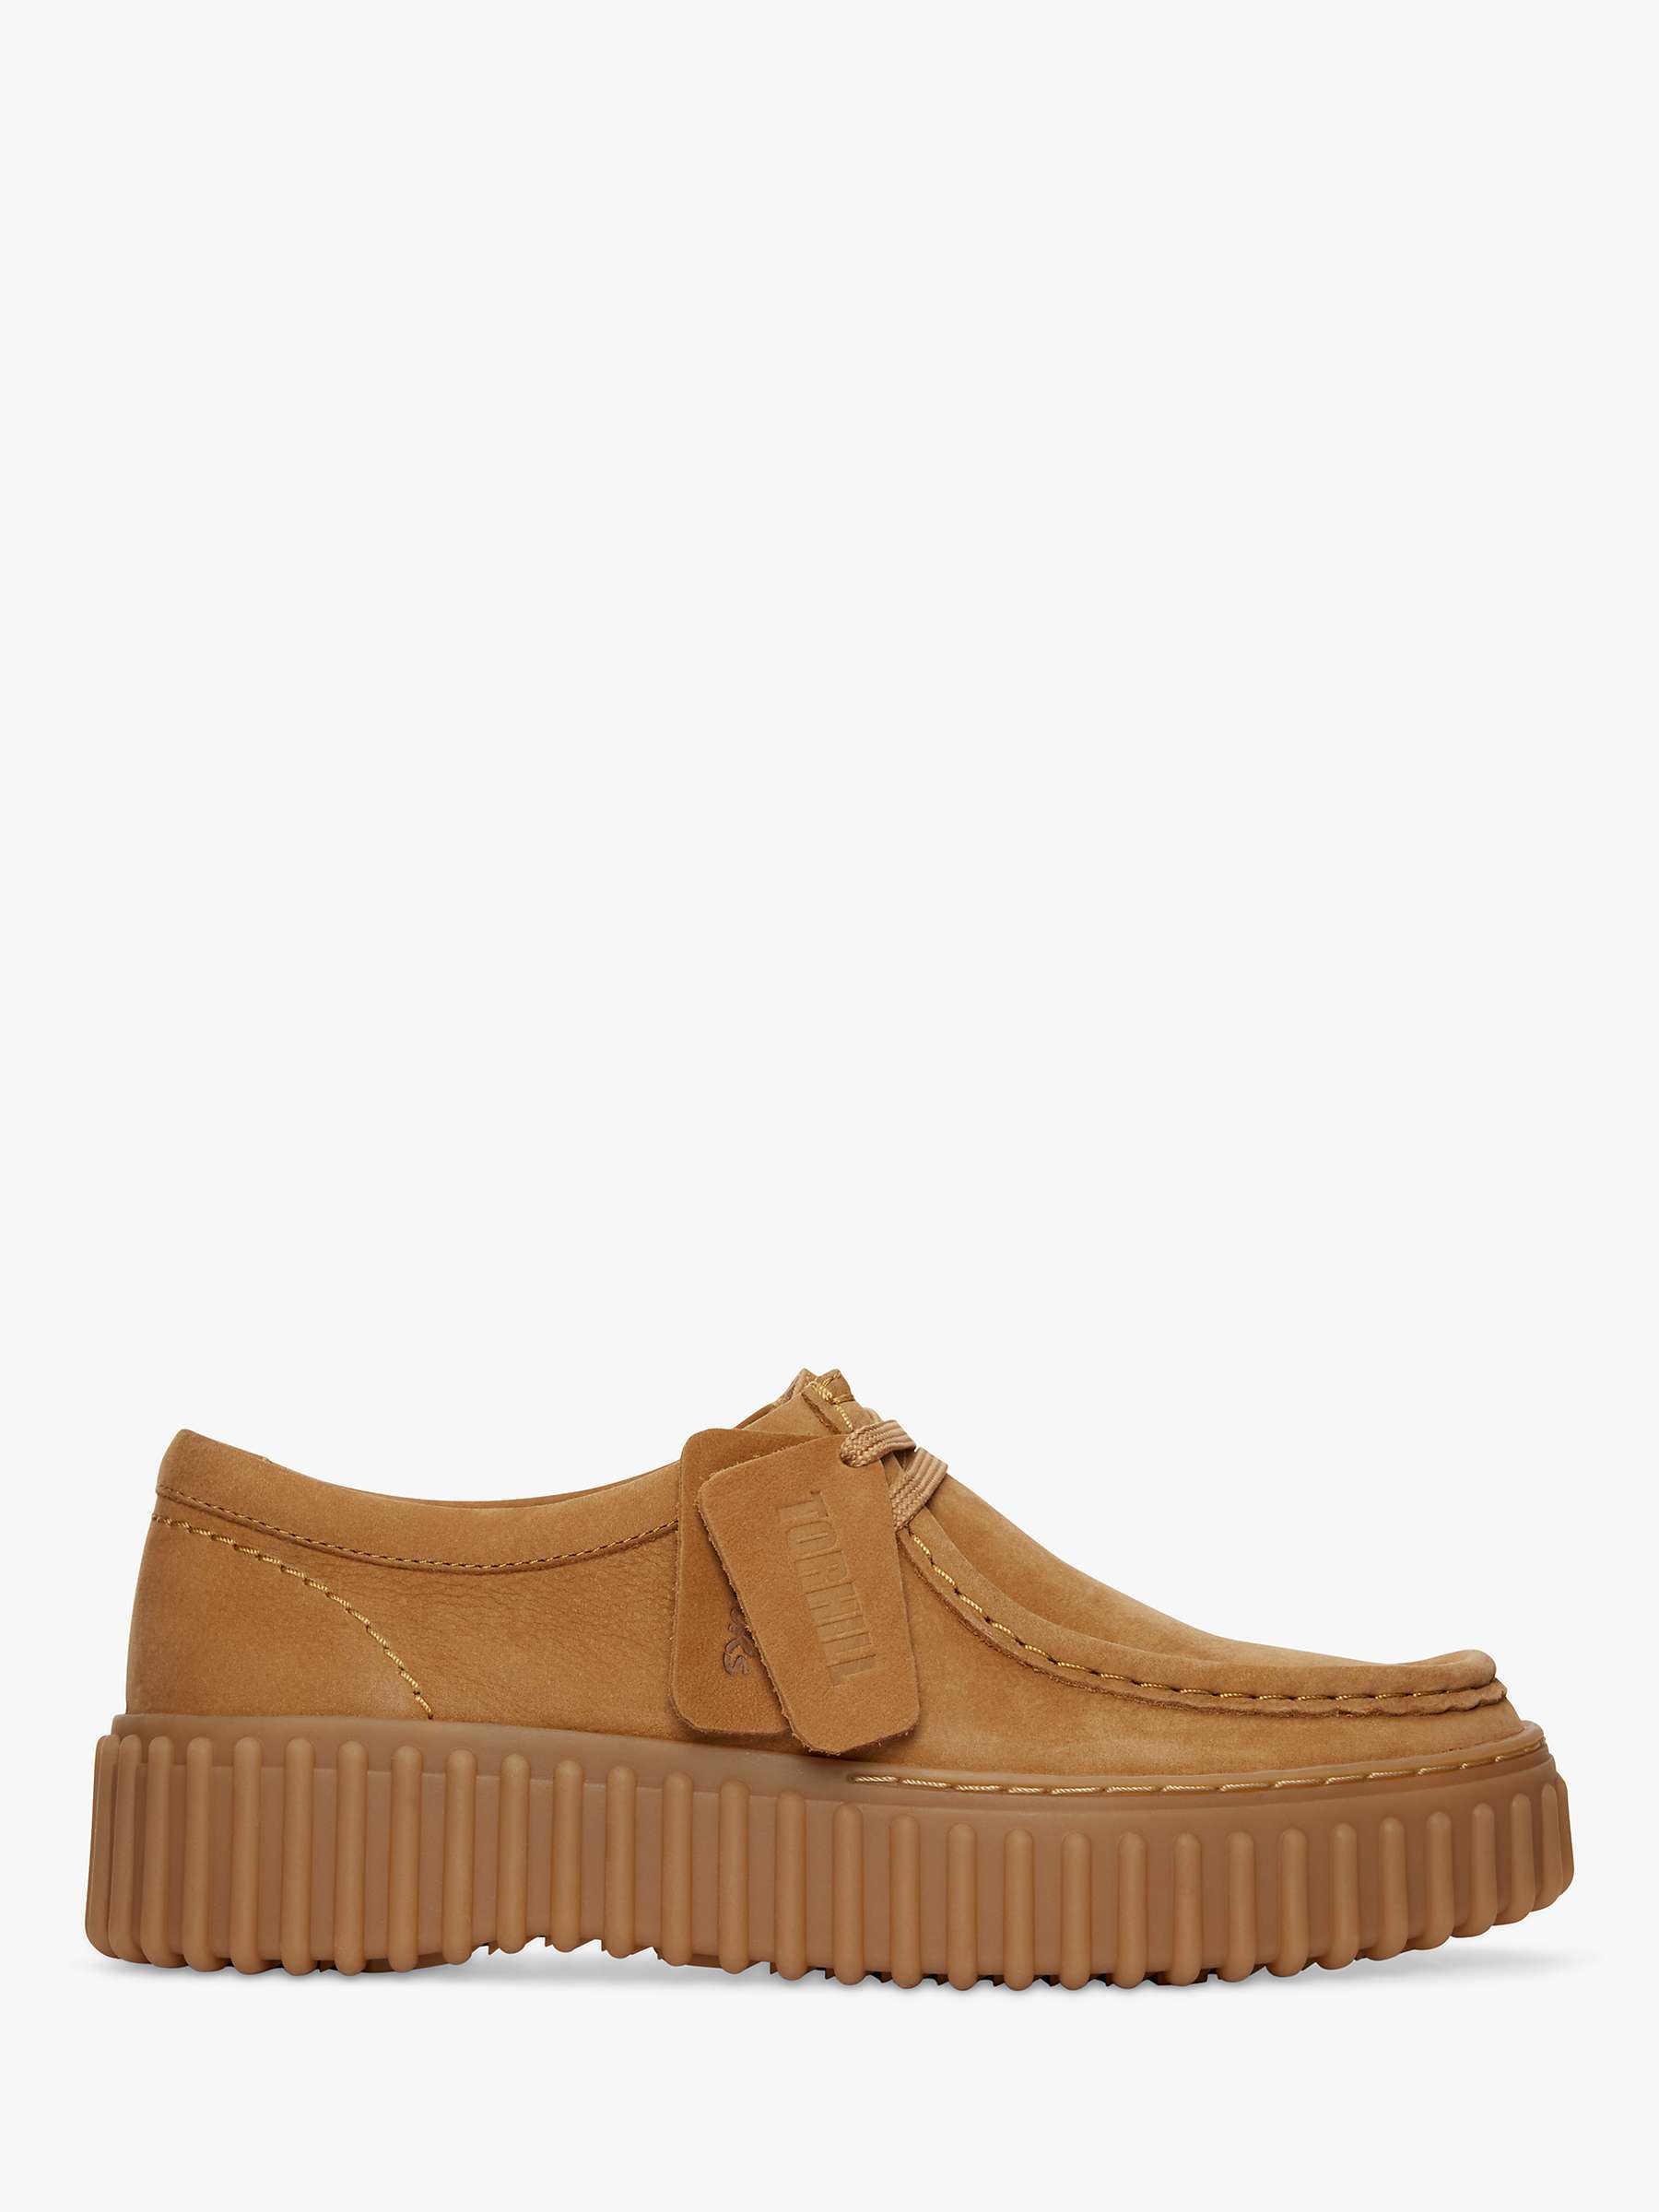 Buy Clarks Torhill Bee Suede Shoes Online at johnlewis.com